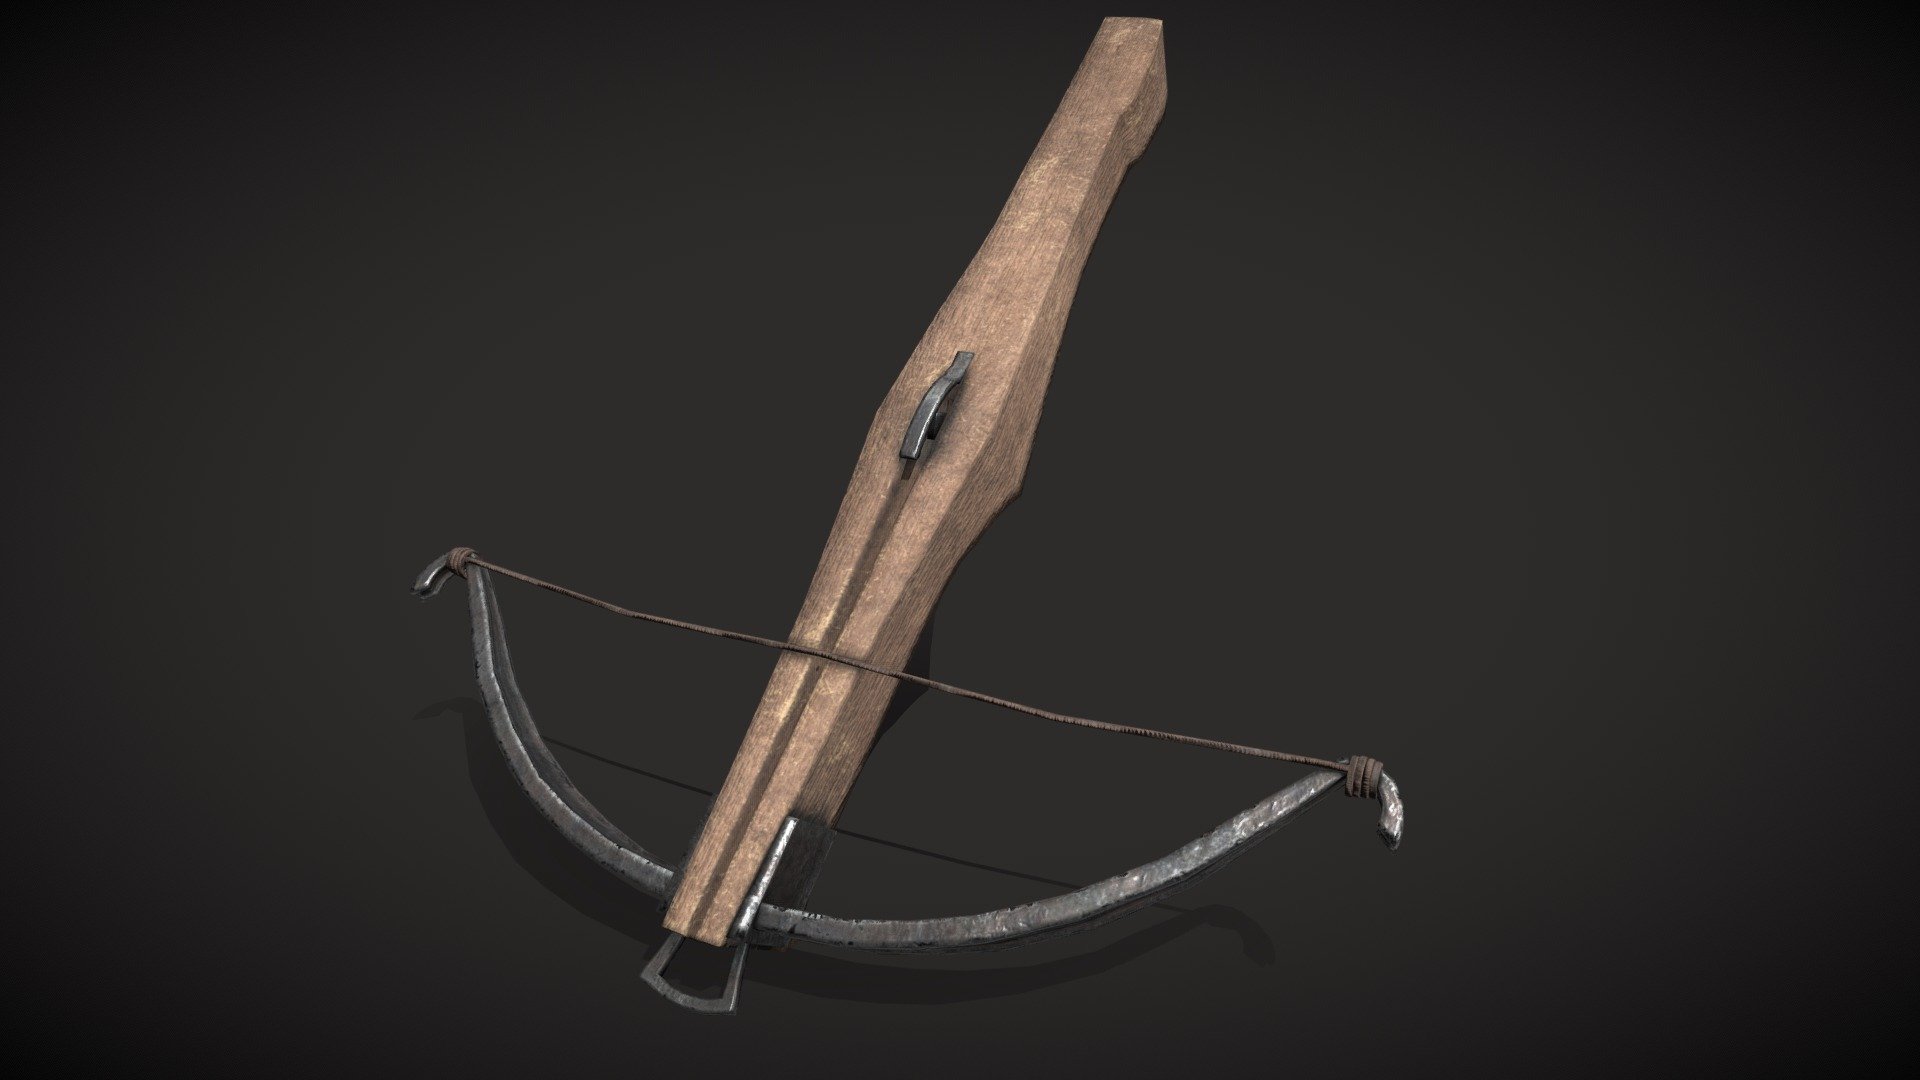 The crossbow reappeared in Europe as a French weapon during the siege of Senlis and again in 984 at the siege of Verdun. They were used at the battle of Hastings in 1066 and by the 12th century it had become a common battlefield weapon. The crossbow superseded hand bows in many European armies during the 12th century, except in England, where the longbow was more popular.
Historically accurate game ready asset modeled in Blender and high quality PBR (Diffuse/Metallic/Roughness/Normal_OpenGL) textures in Substance Painter at 4k 2k and 1k resolution and subdivision ready for different LOD implementations, at FBX and OBJ files to work with any 3D software. 

LOD 00
Vertex 15482
Faces 15336

LOD 01
Vertex 3930
Faces 3820 - Medieval Crossbow - Buy Royalty Free 3D model by XYZ 3Dassets (@XYZ3Dassets) 3d model